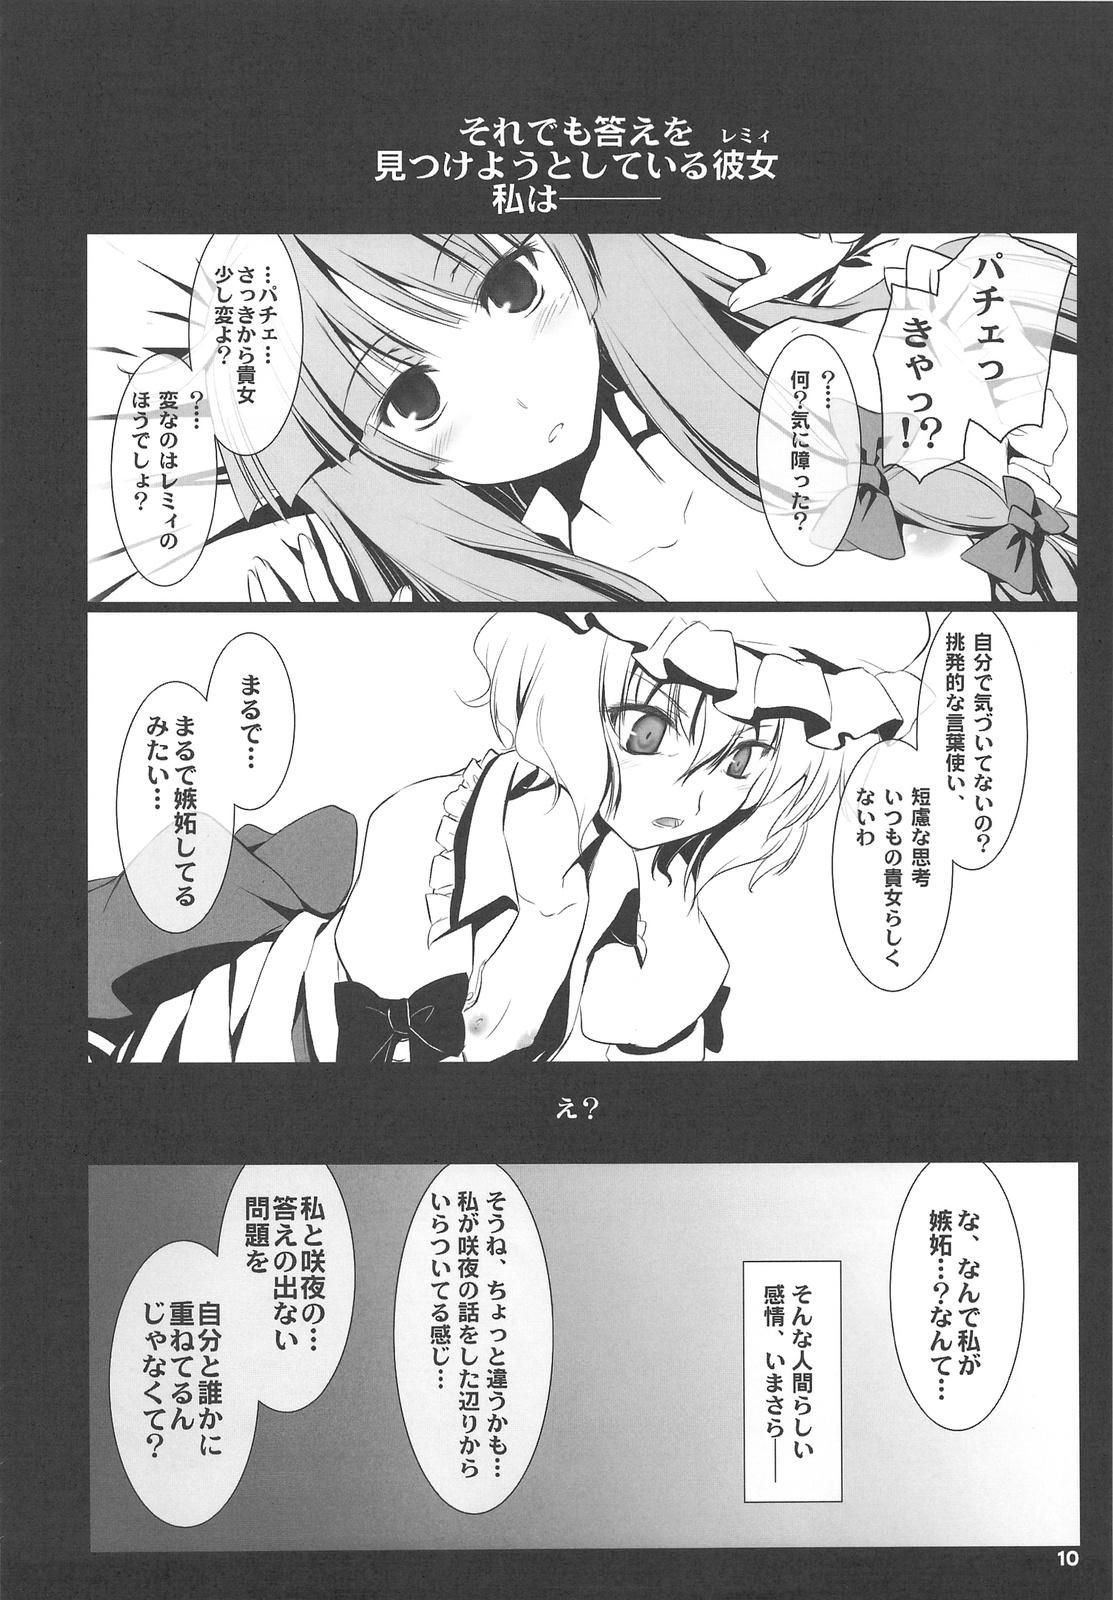 She RED Ring - Touhou project Massages - Page 9